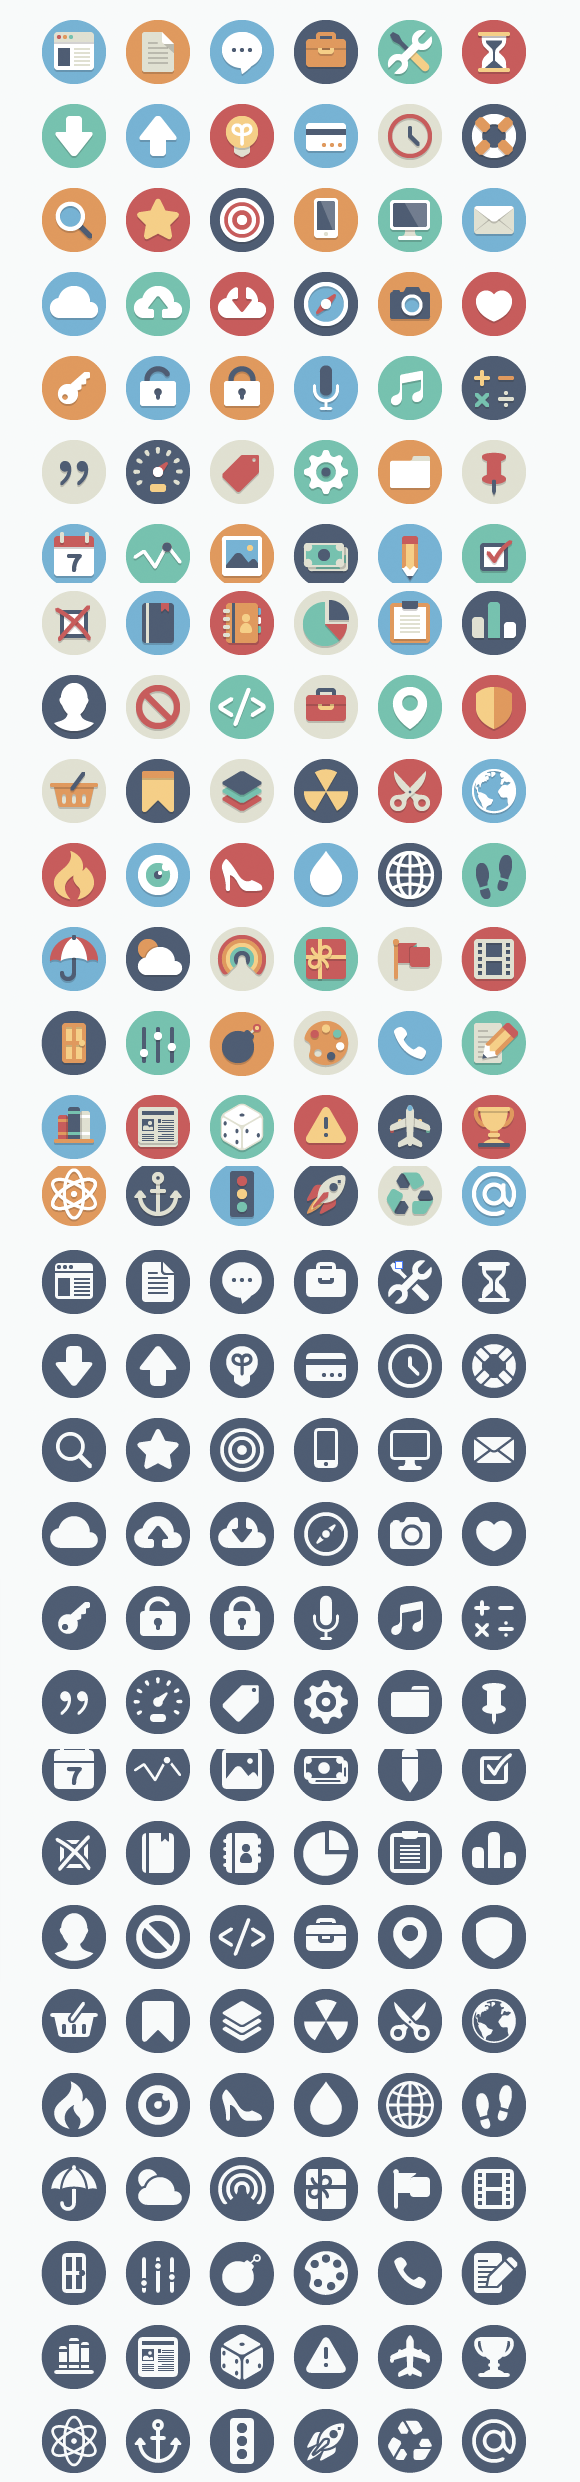 icons free flat download open source gpl license